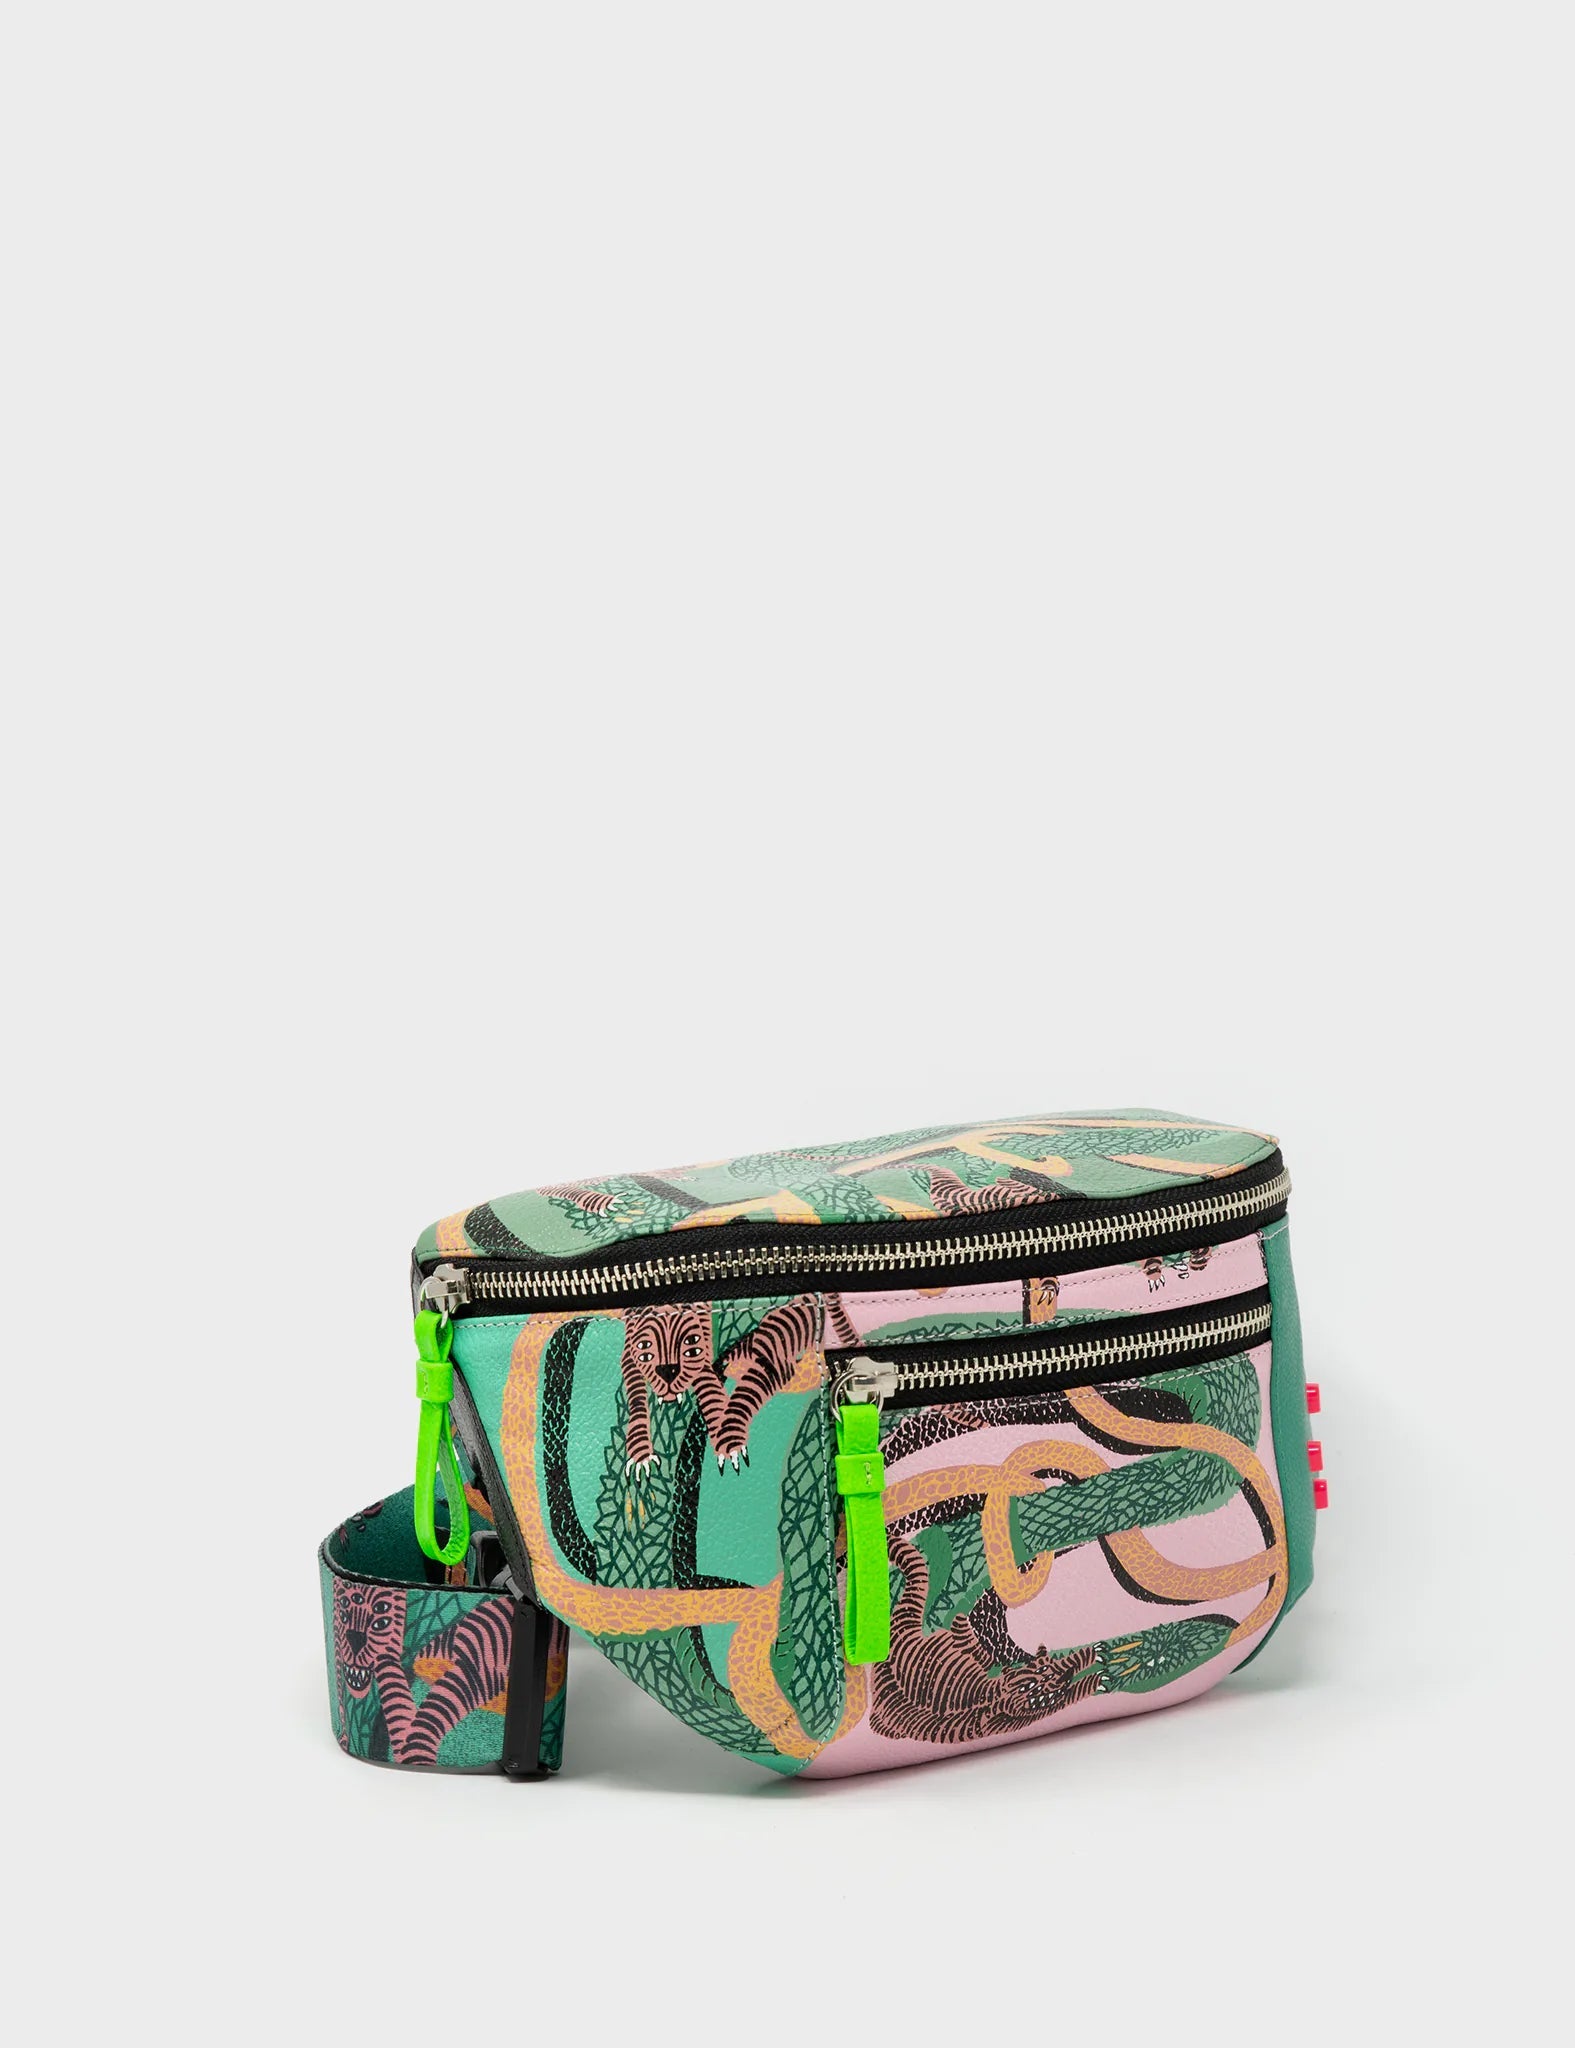 Harold Fanny Pack Deep Green Leather - Tiger And Snake Print - Front corner angle view